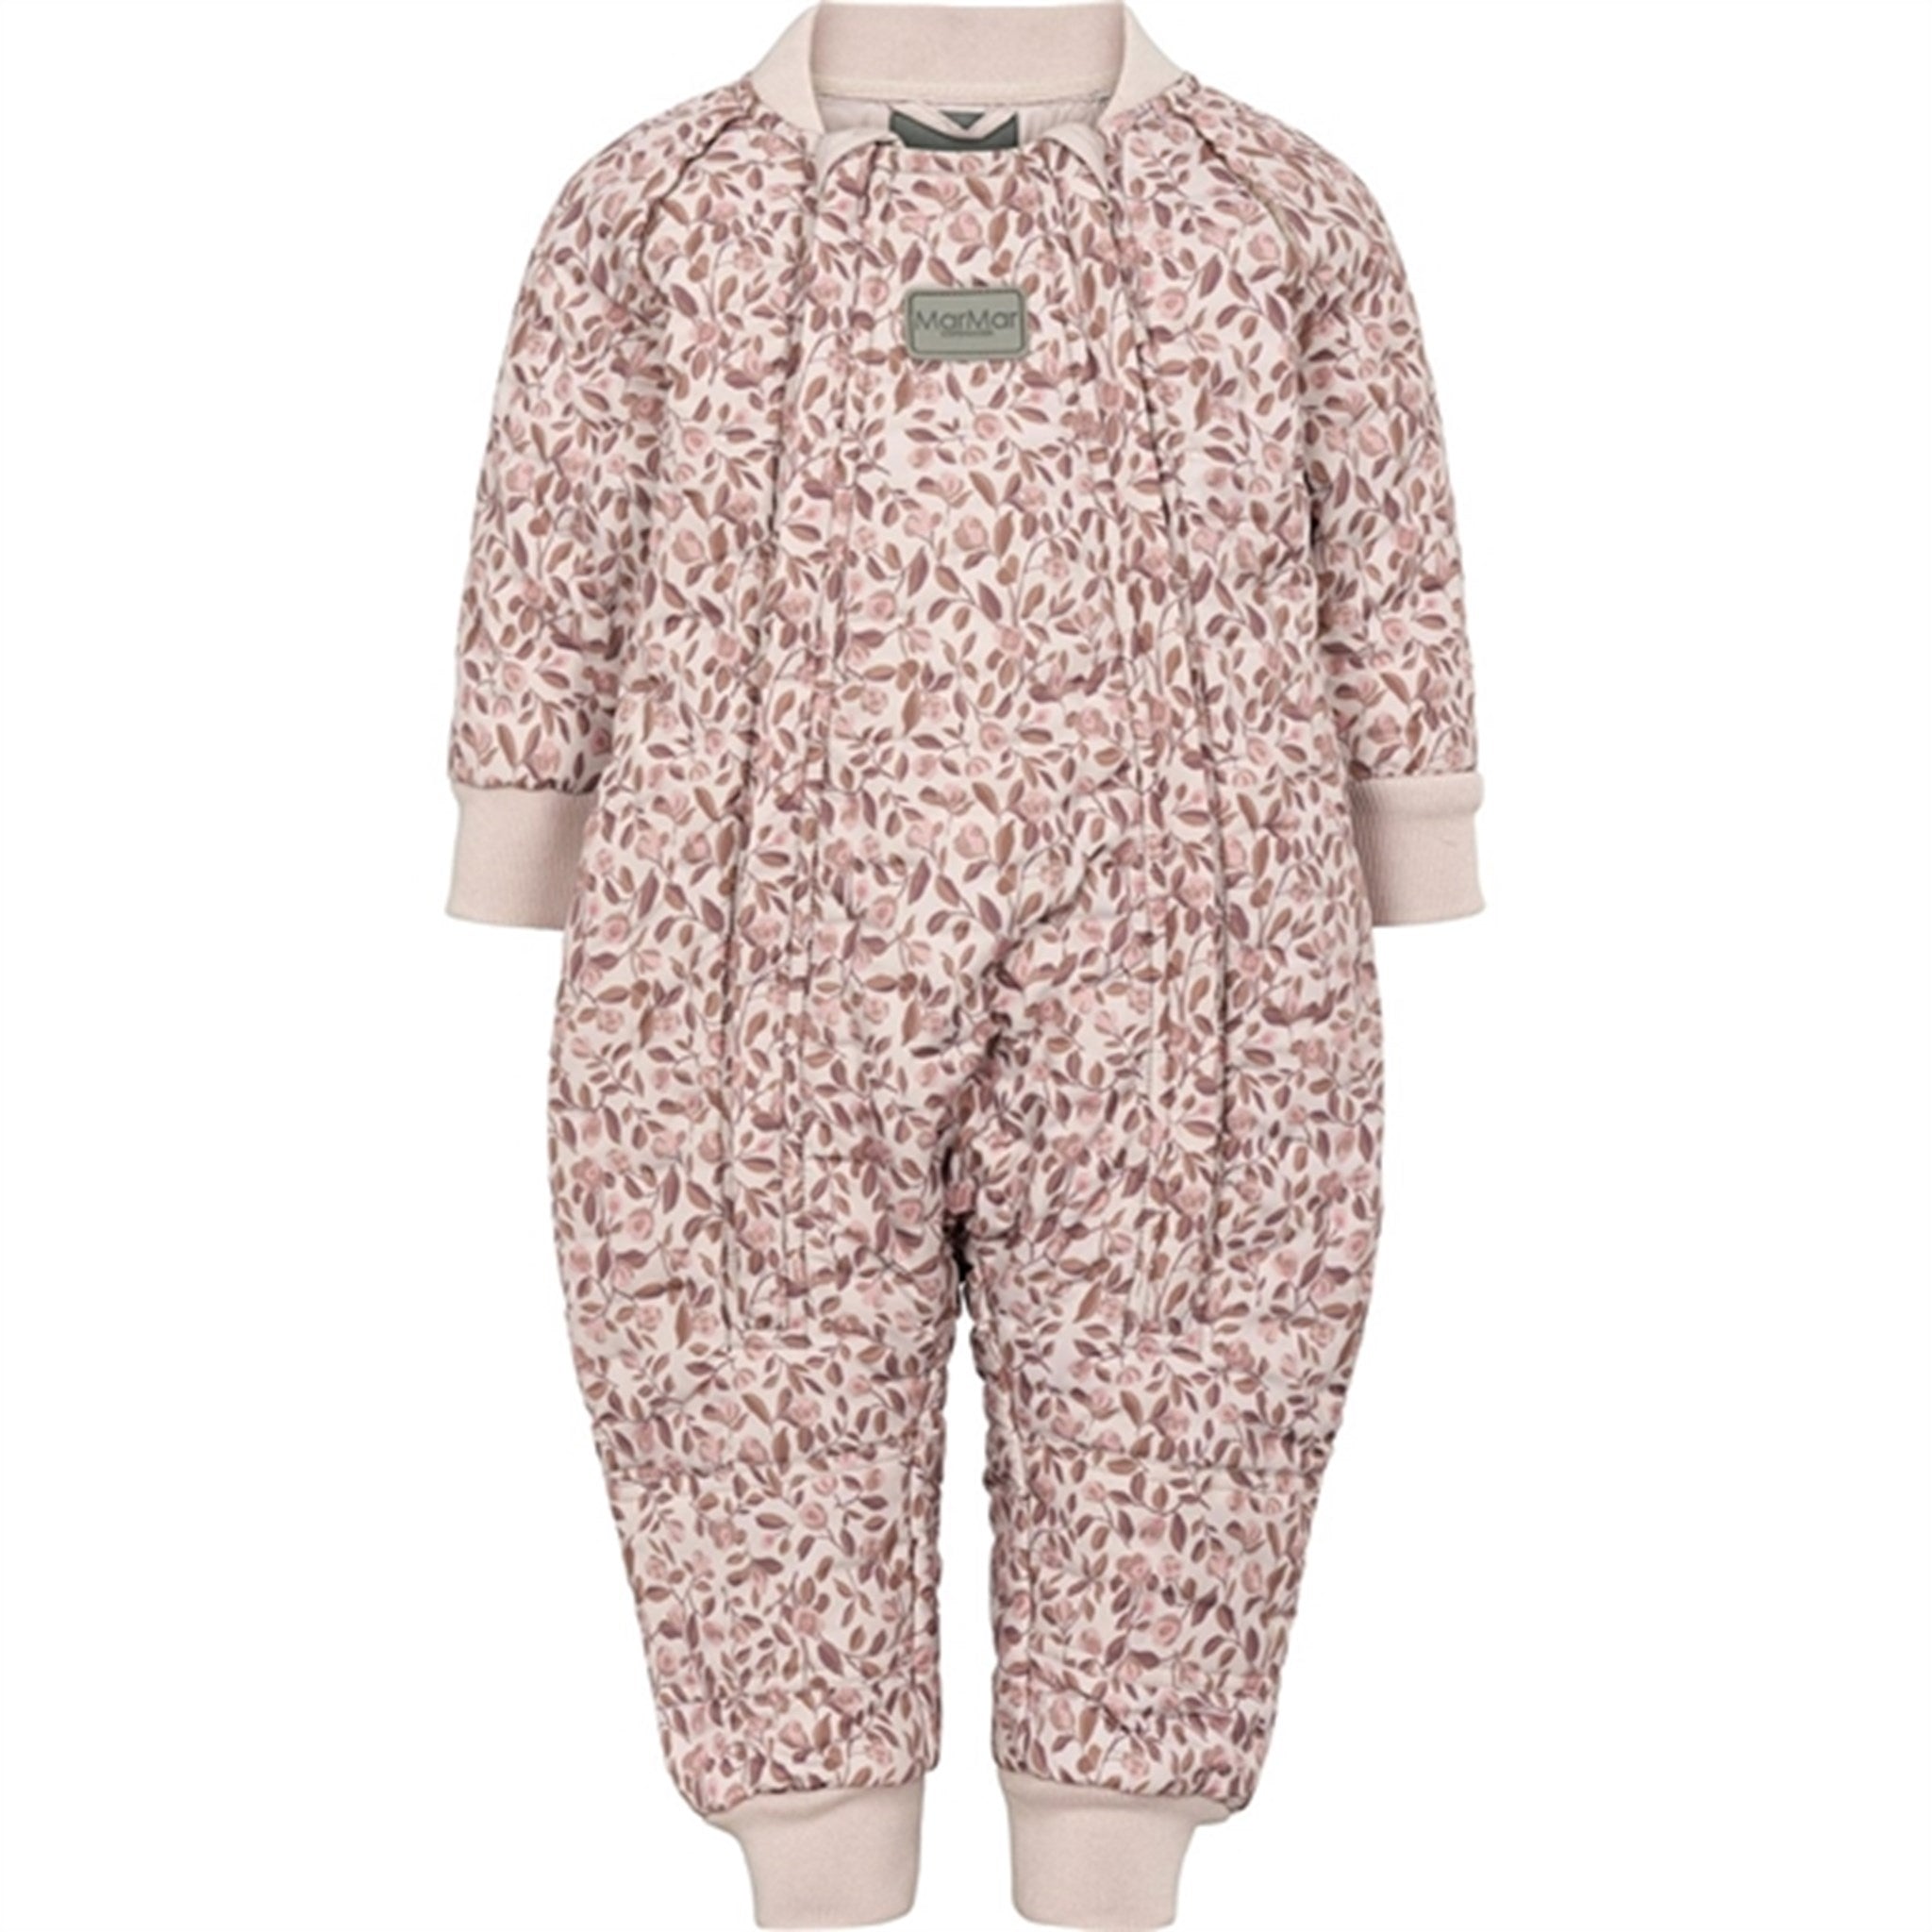 MarMar Blossom Oza Thermo Suit